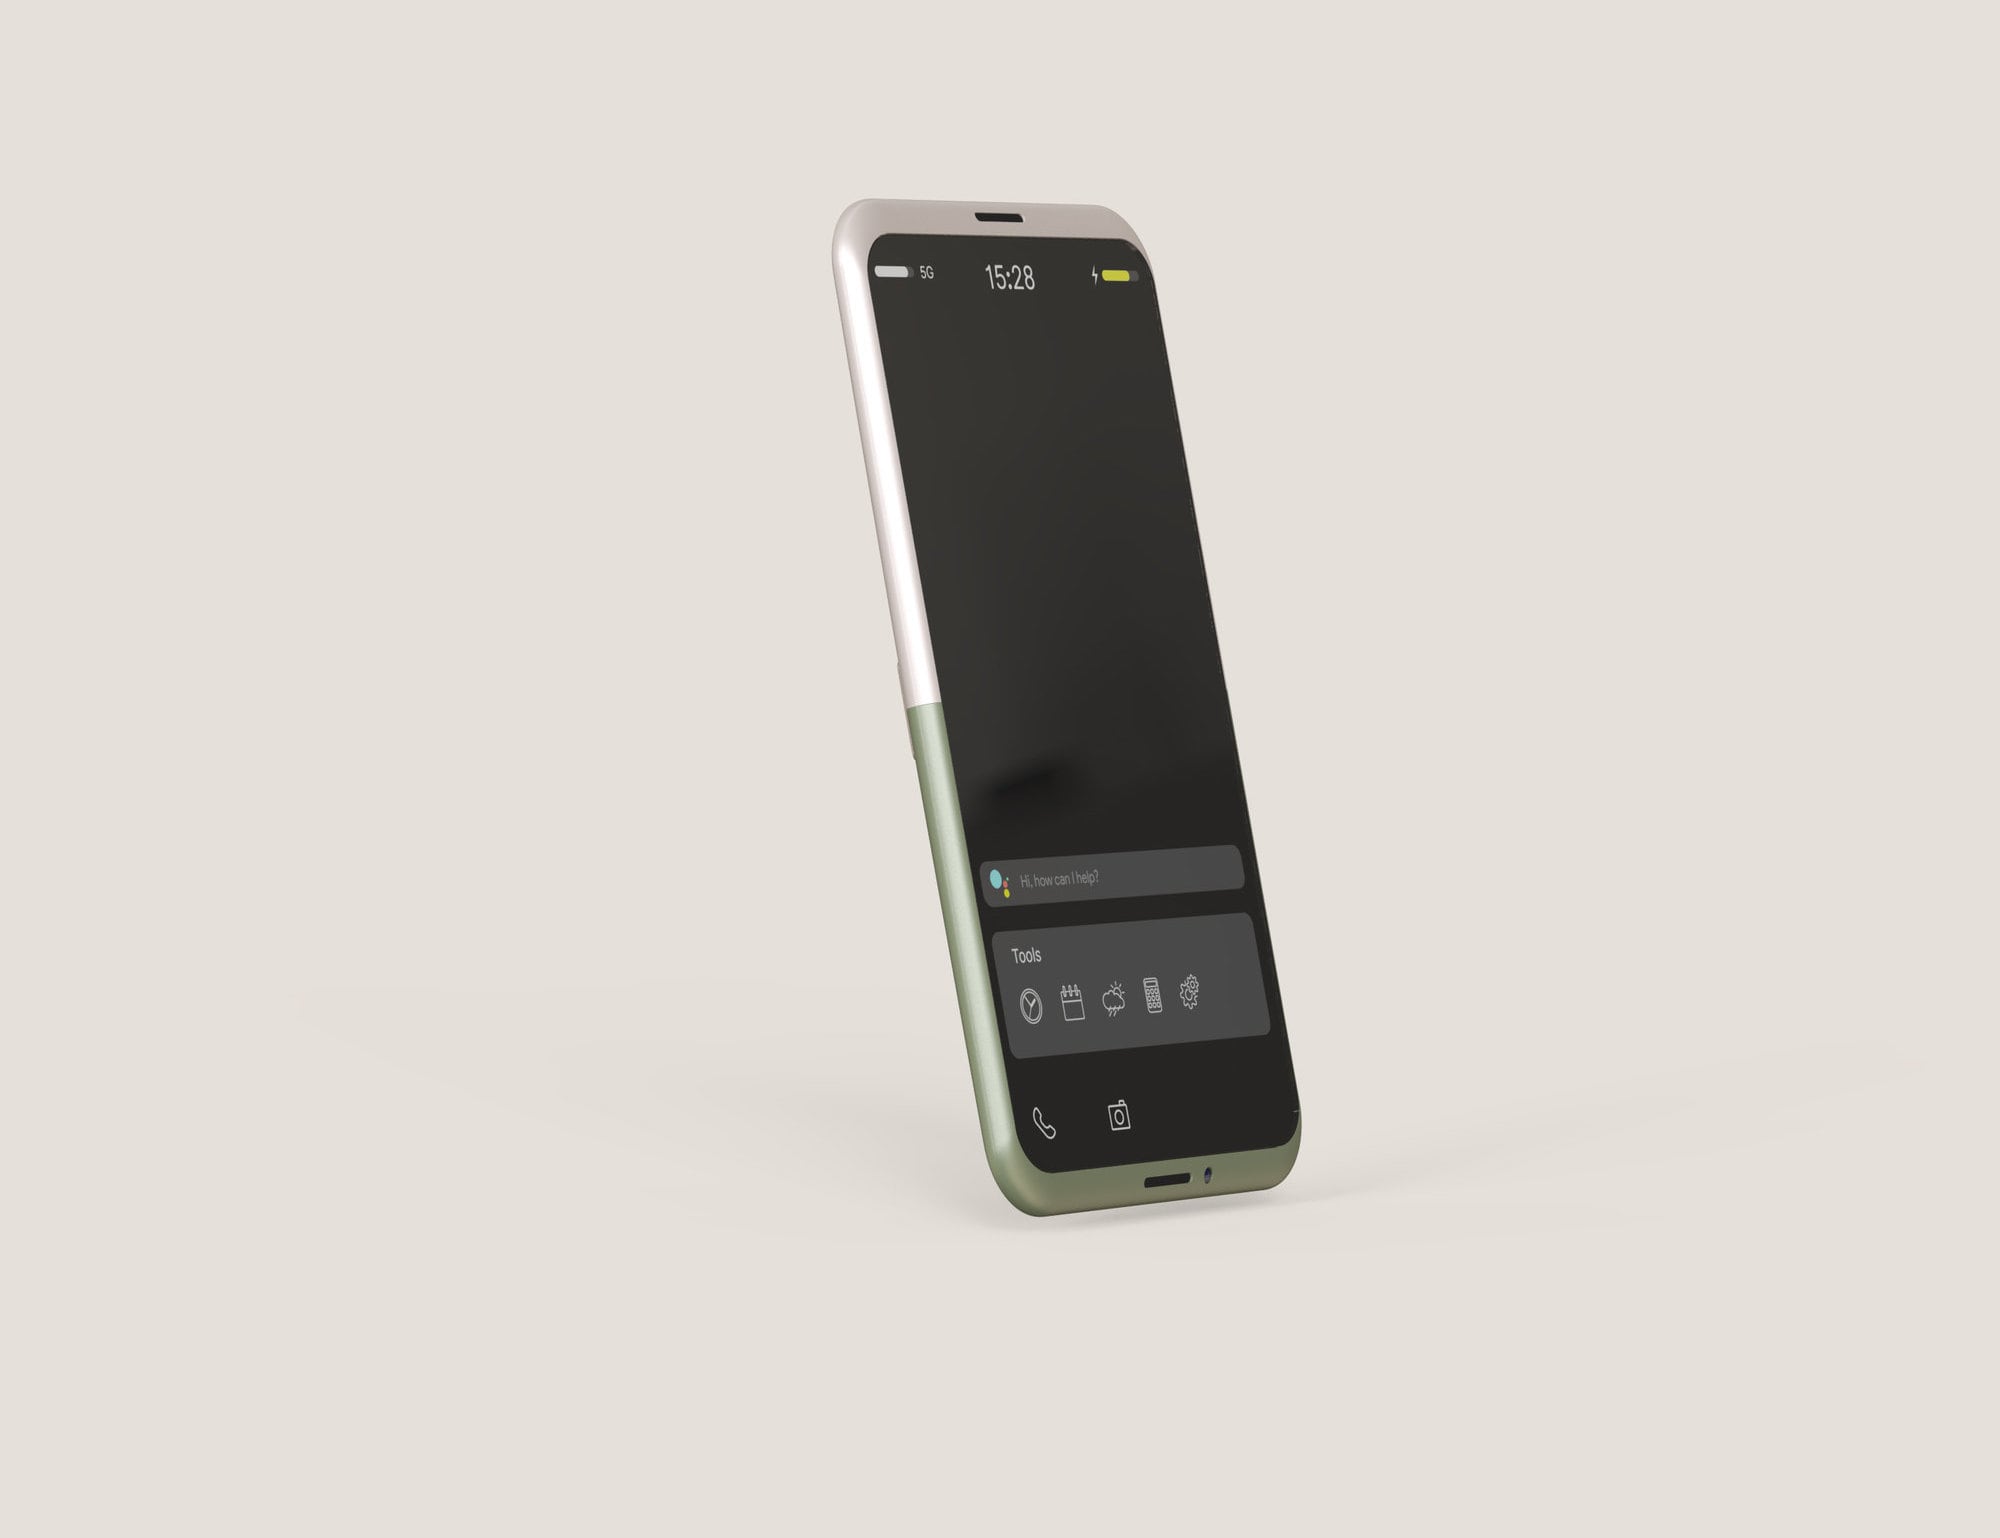 Morrama User-Friendly Smartphone is designed to help you stay in the moment